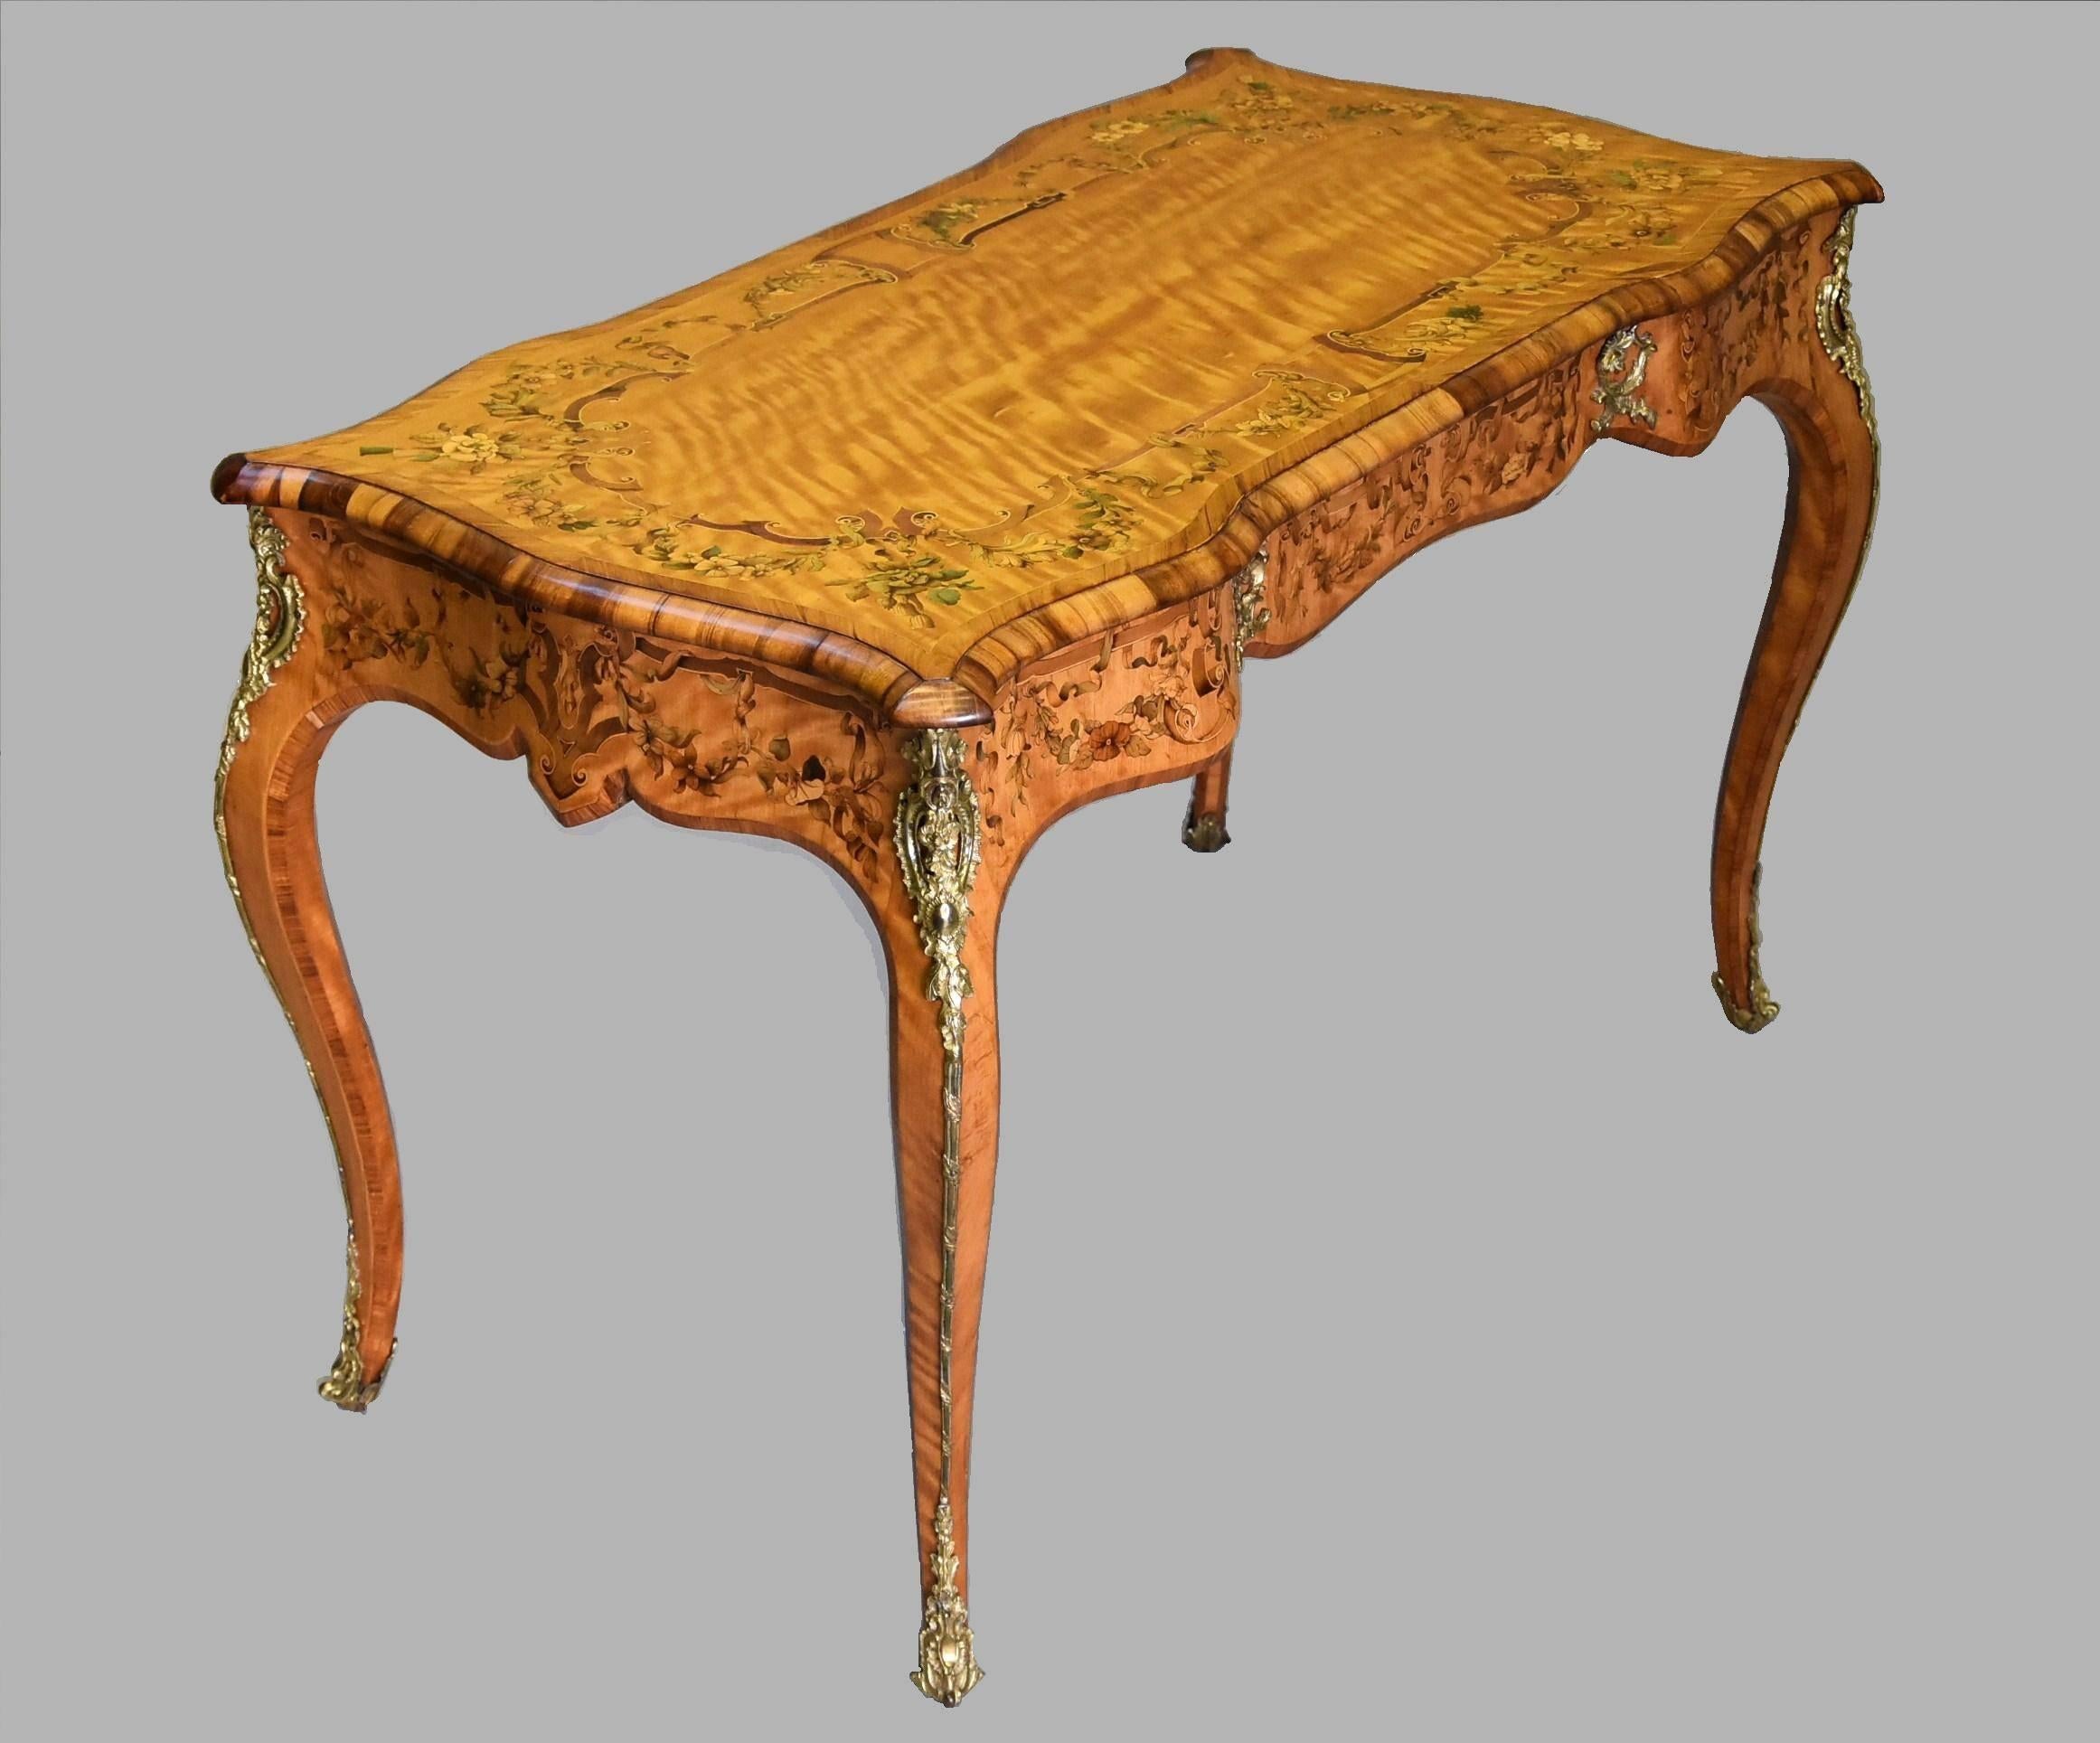 A mid-19th century superb quality satin birch and marquetry bureau plat or writing table with ormolu mounts attributed to Edward Holmes Baldock (1777-1845) and the Blake family.

This bureau plat consists of a superb satin birch top inlaid with